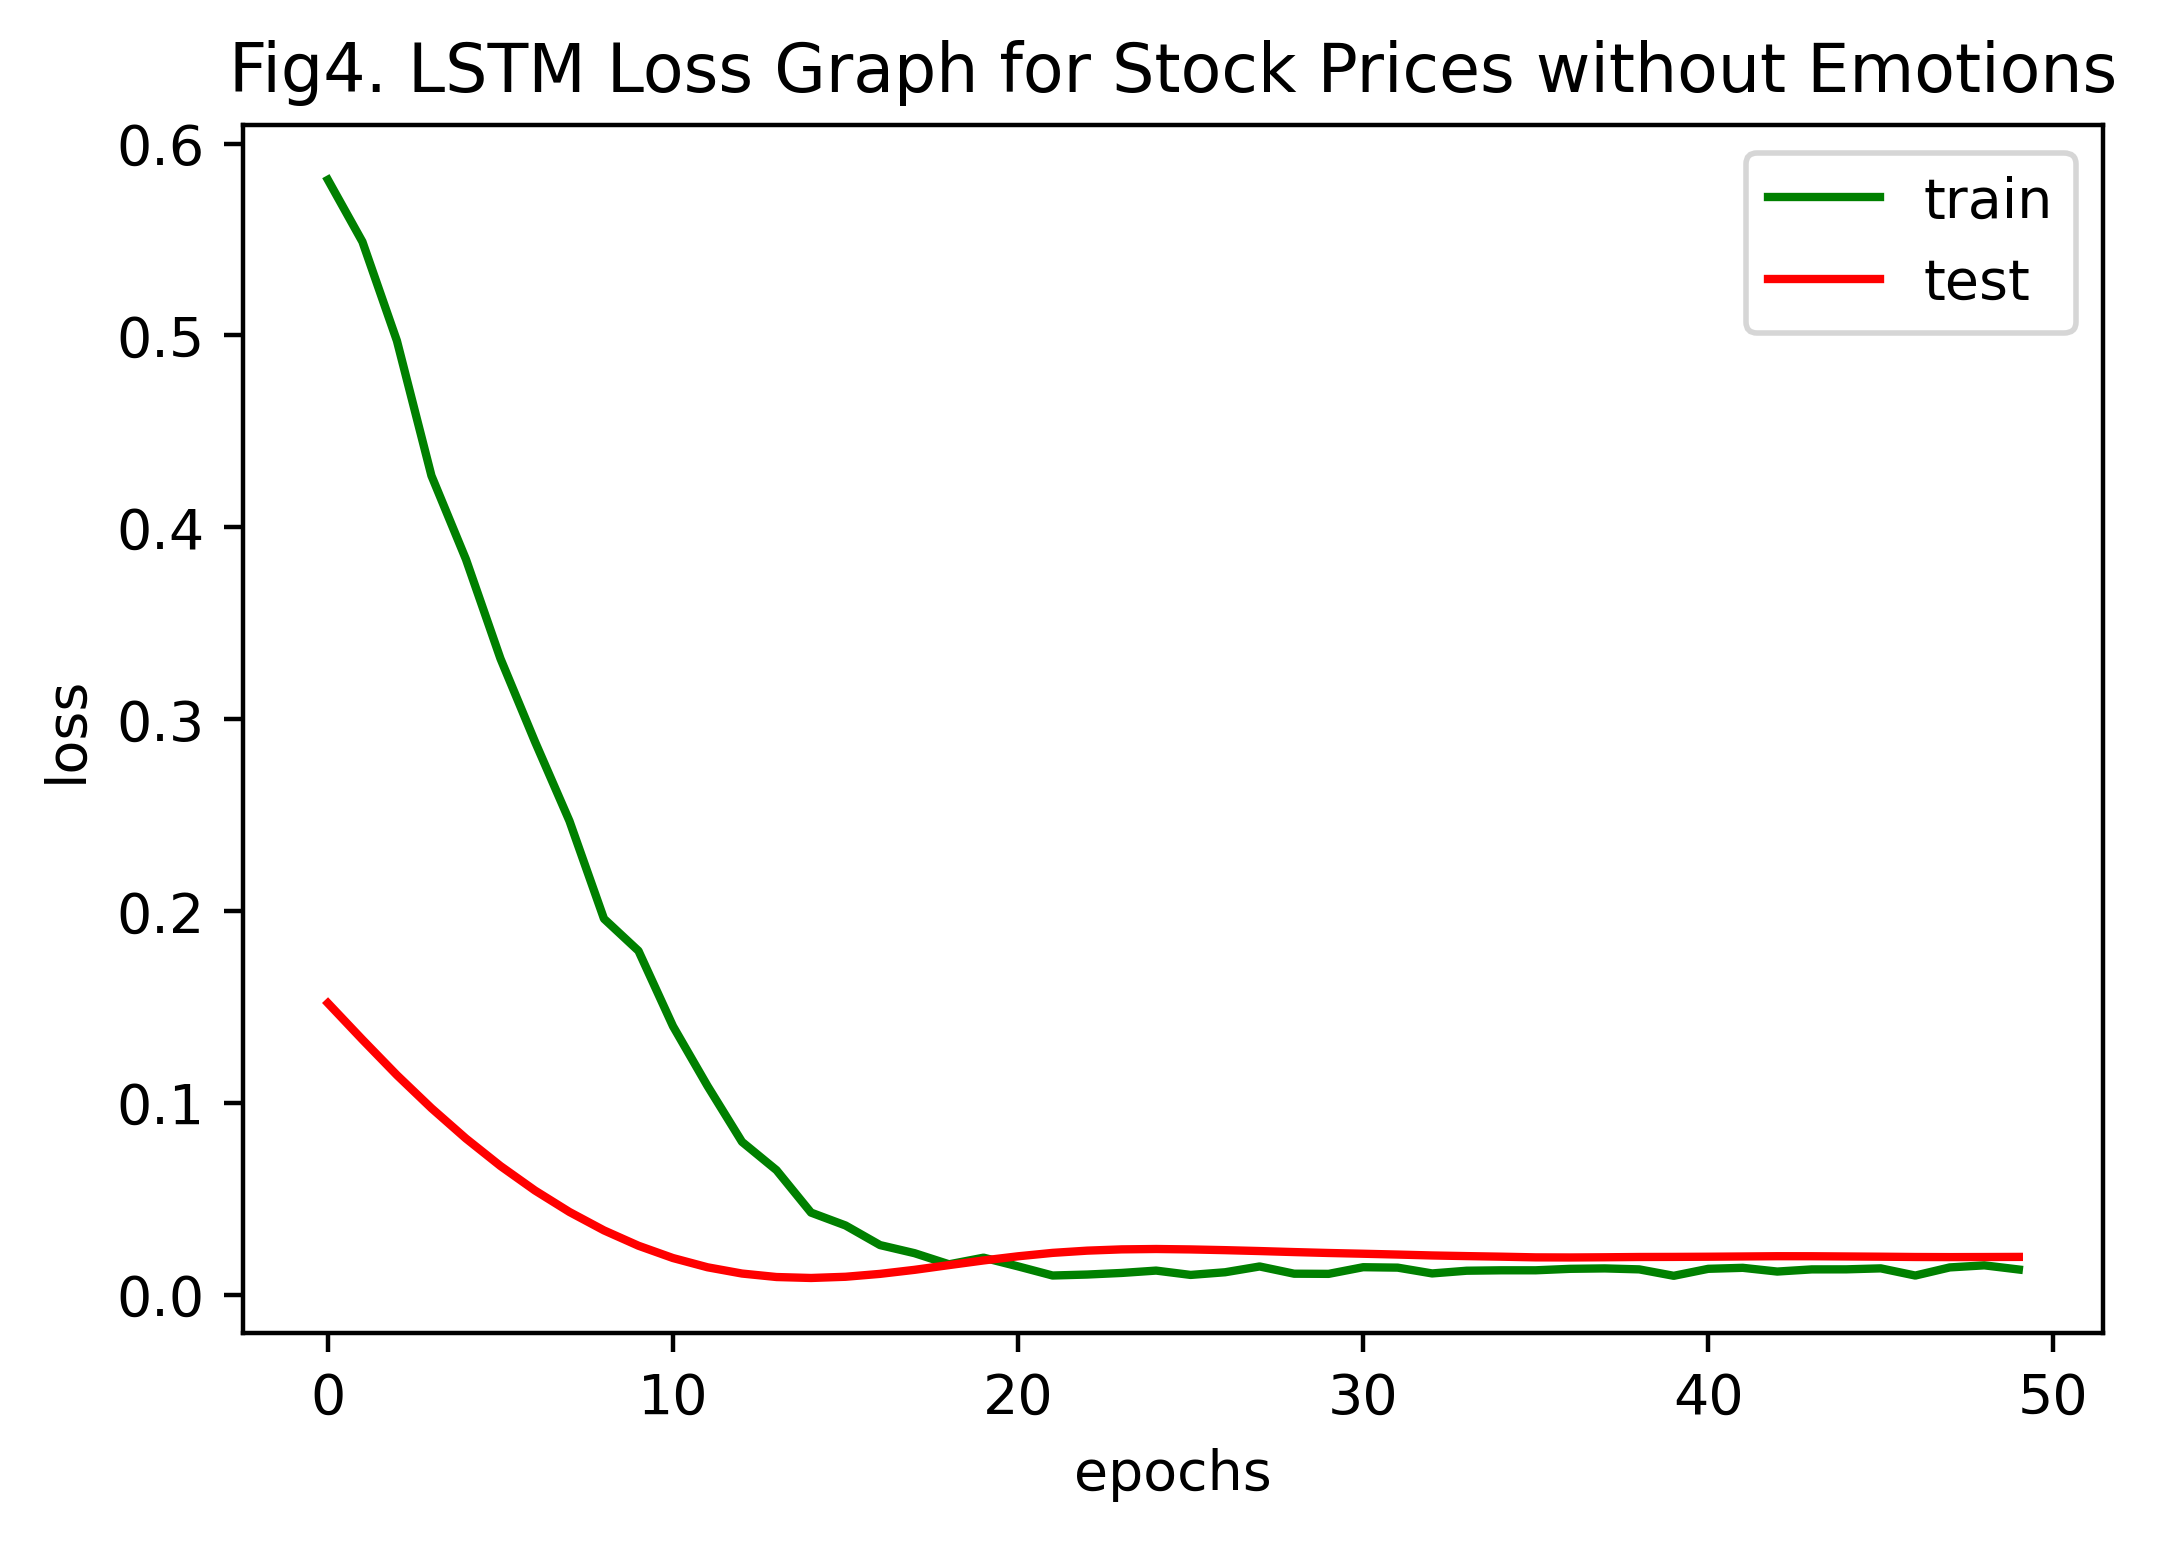 fig4_LSTM_Loss_Graph_for_Stock_Prices_without_Emotions